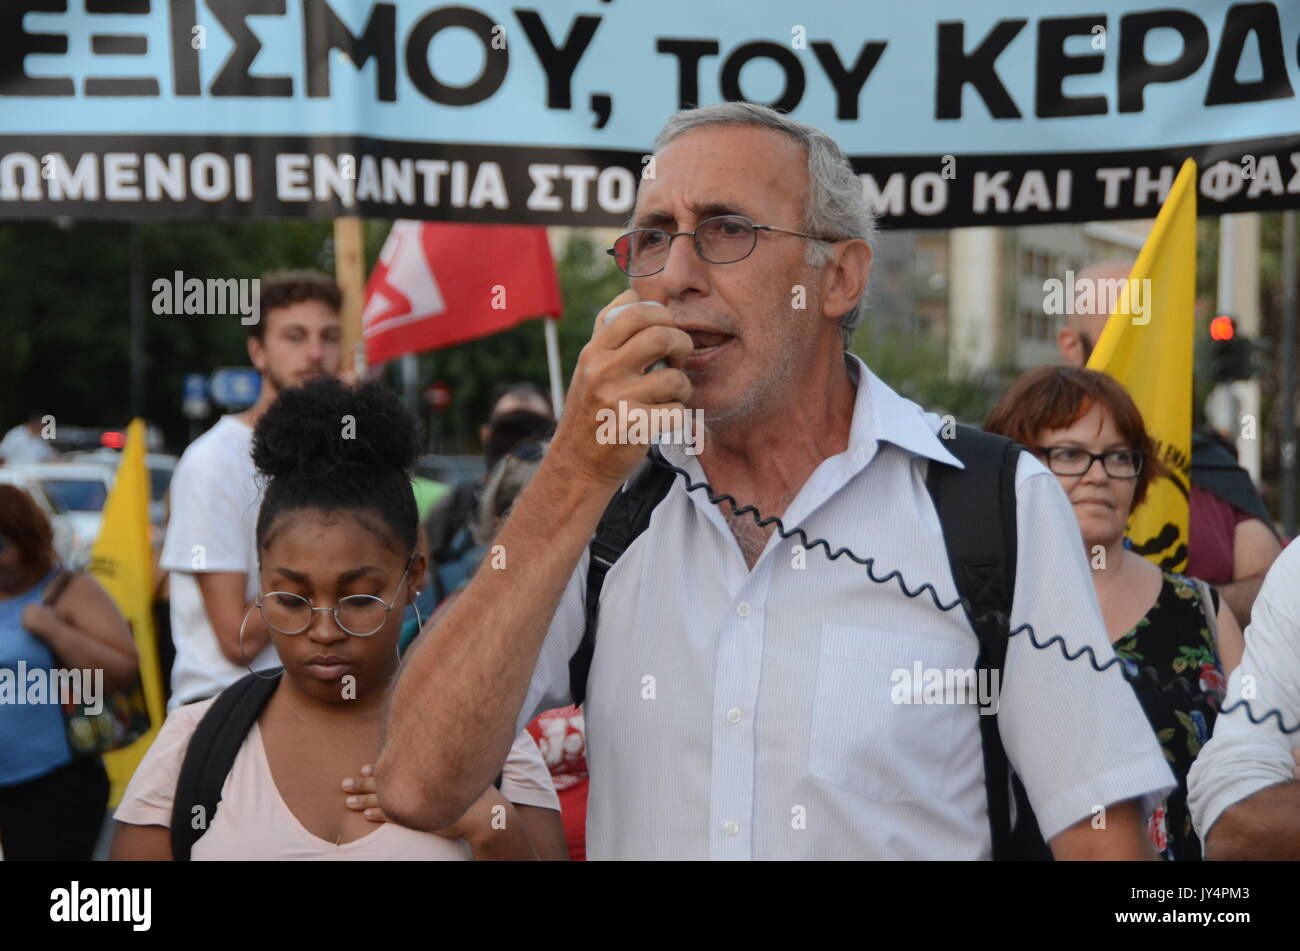 Athens, Greece. 17th Aug, 2017. KEERFA (Movement against Racism And Fascist Threat) activists demonstrate in fron of the American Embassy in Athens is support of Heather Heyer that lost her life during classes in Charlottesville Usa. Demonstrators shouted slogans against KKK, white supermascists and neonazis. Credit: George Panagakis/Pacific Press/Alamy Live News Stock Photo